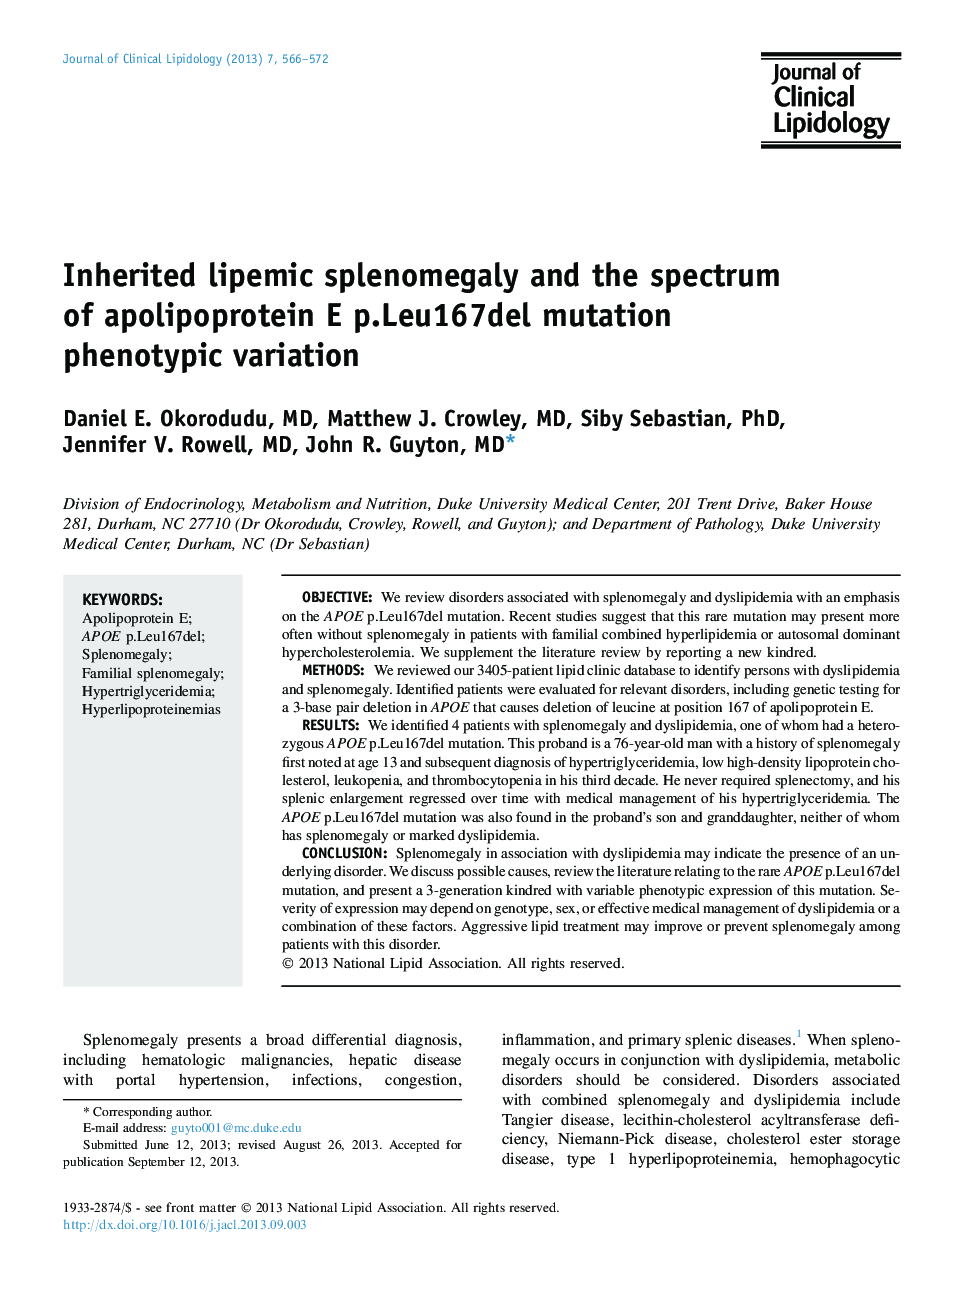 Inherited lipemic splenomegaly and the spectrum of apolipoprotein E p.Leu167del mutation phenotypic variation